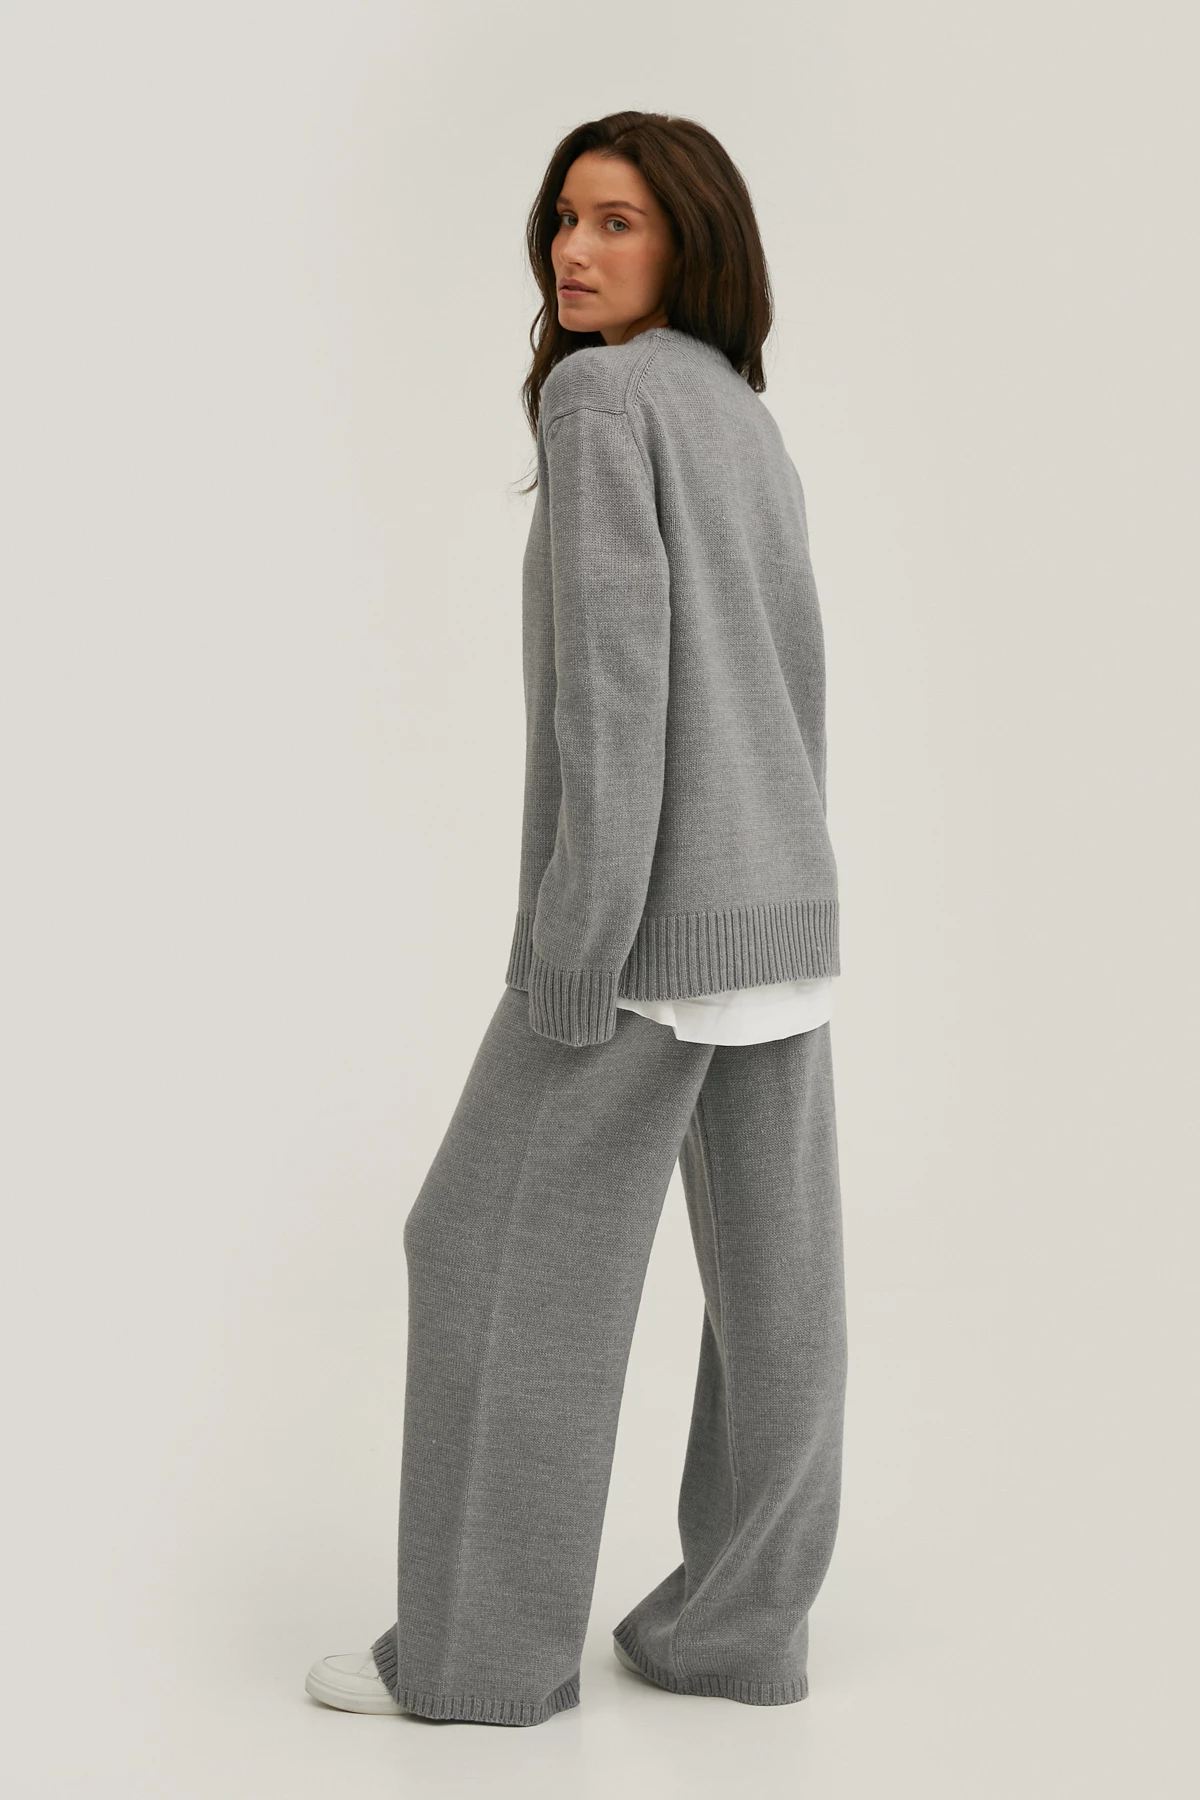 Grey knitted cropped pants with merino wool, photo 2